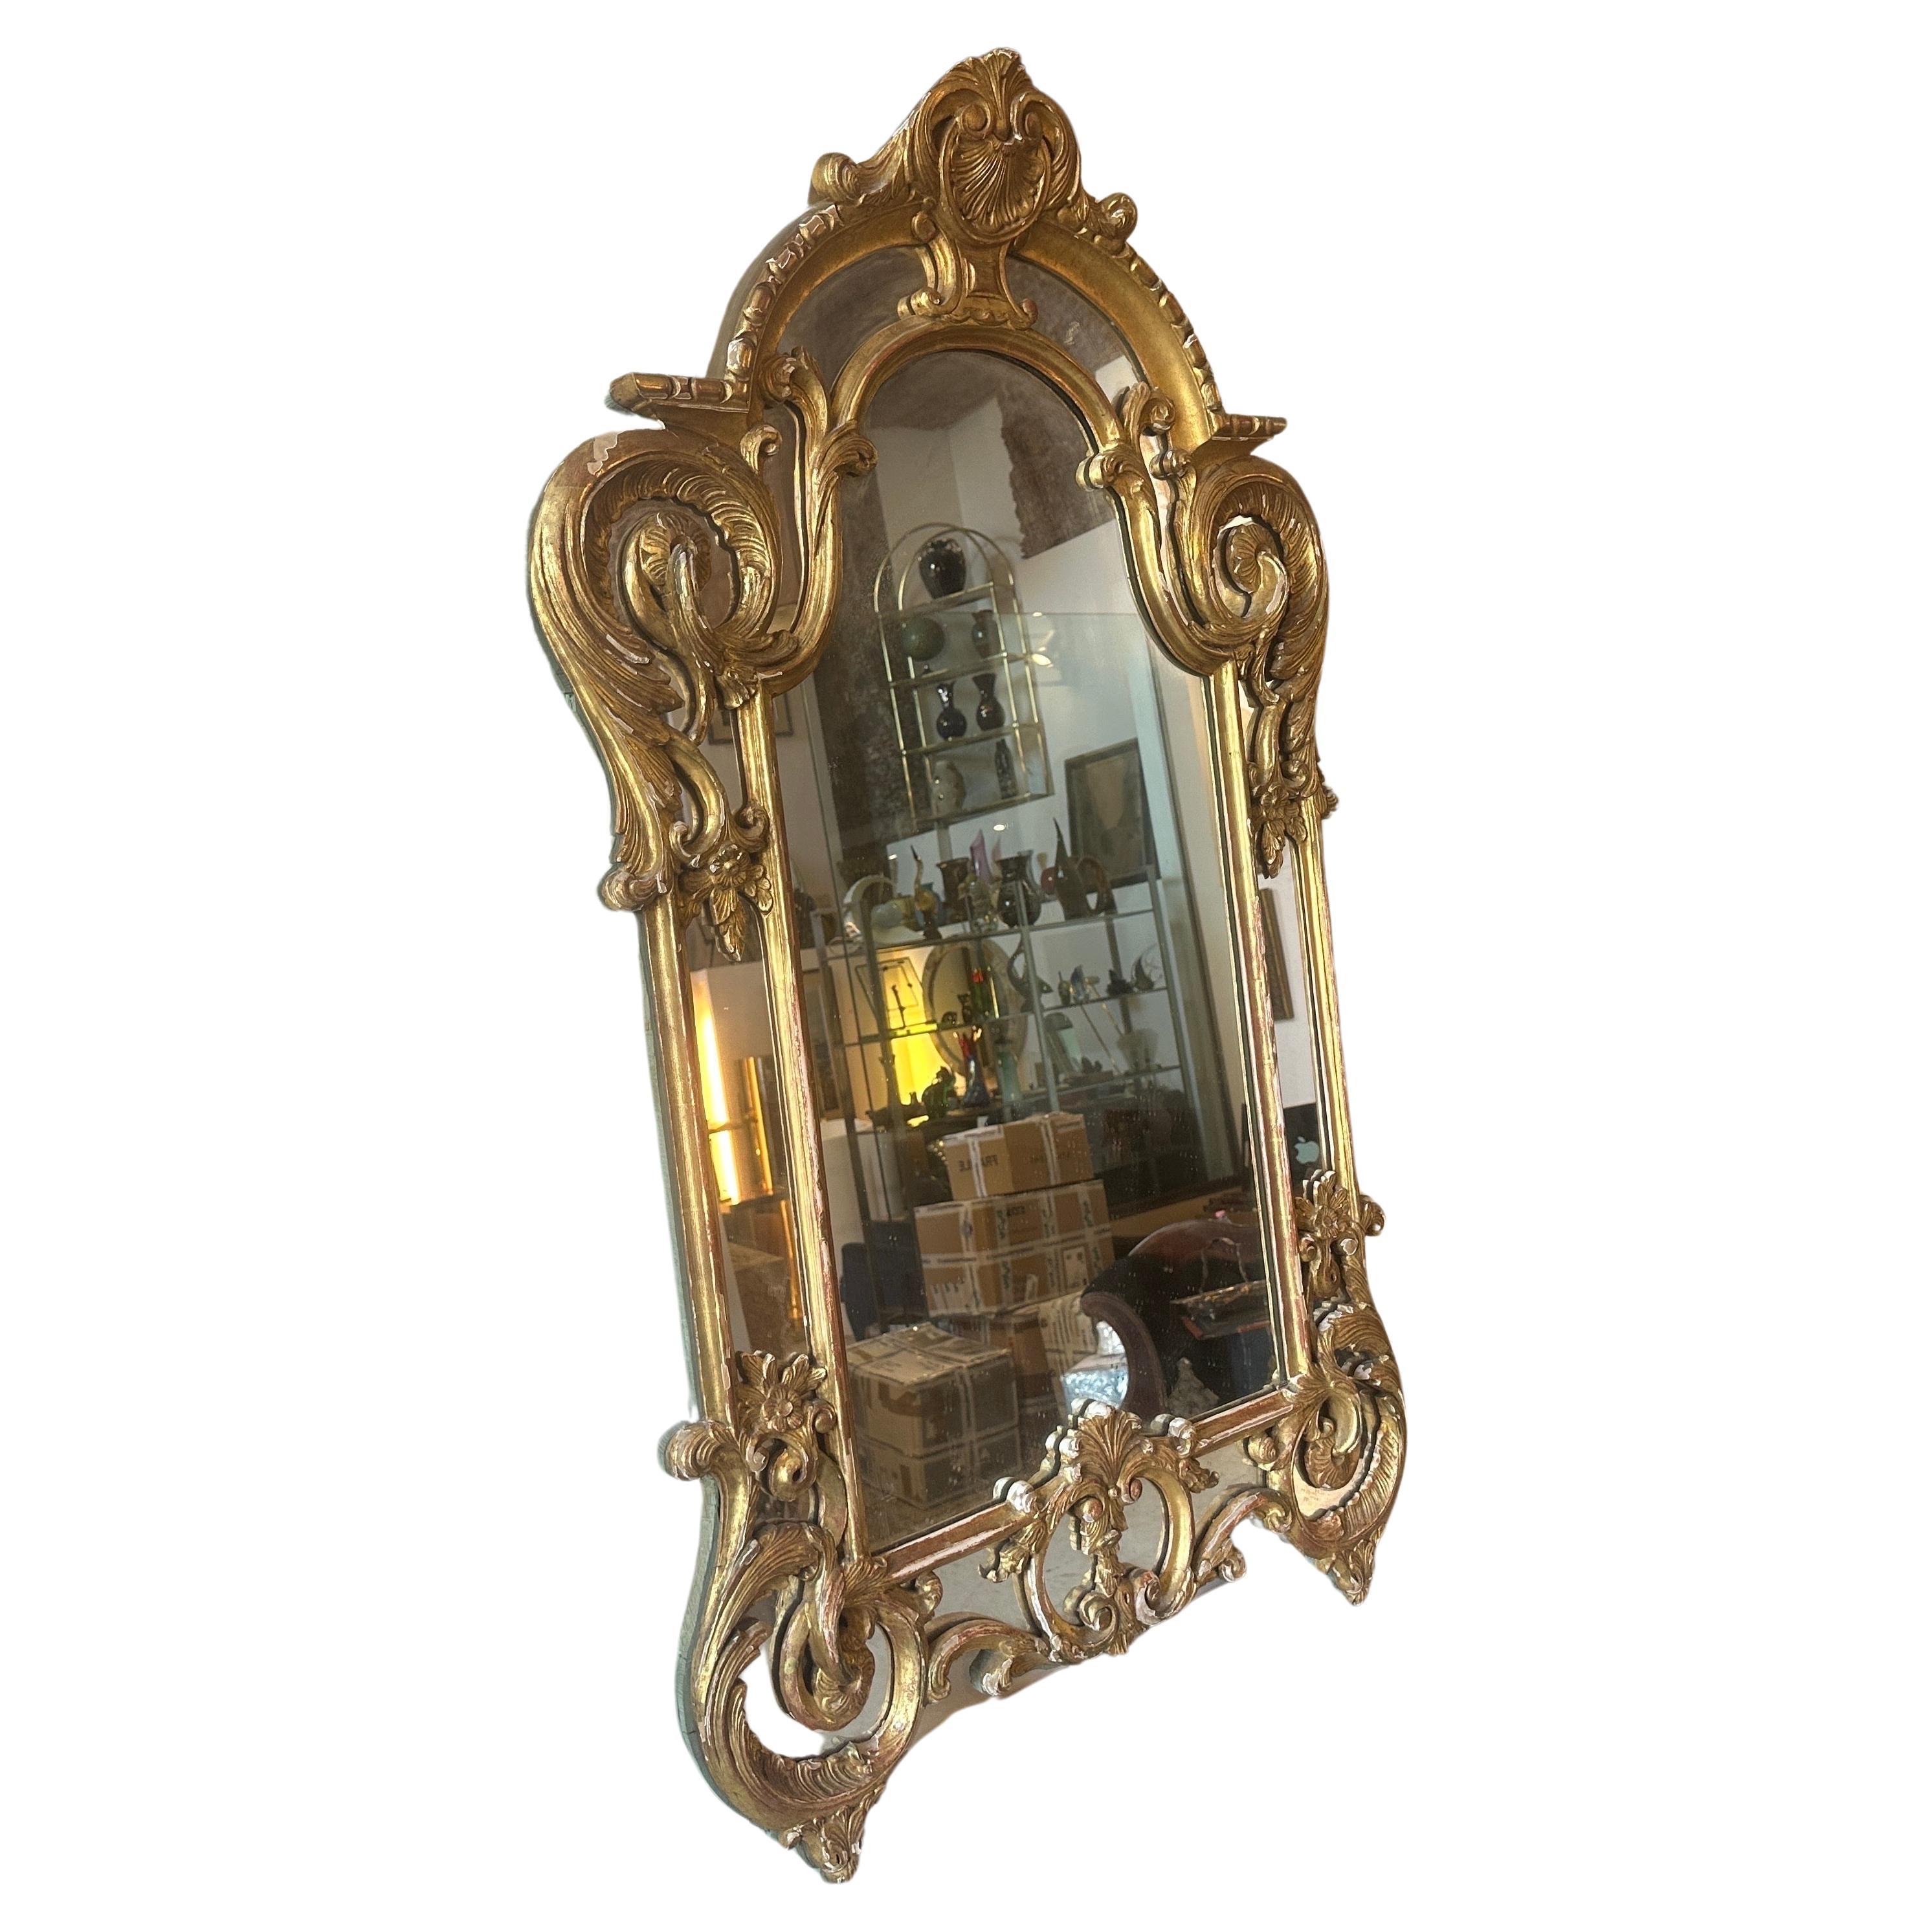 This gilded wood Italian wall mirror is a beautiful and elegant piece of decorative art and furniture from late 19th century. The Louis Philippe style, which was popular during the period, is known for its simplicity, grace, and understated